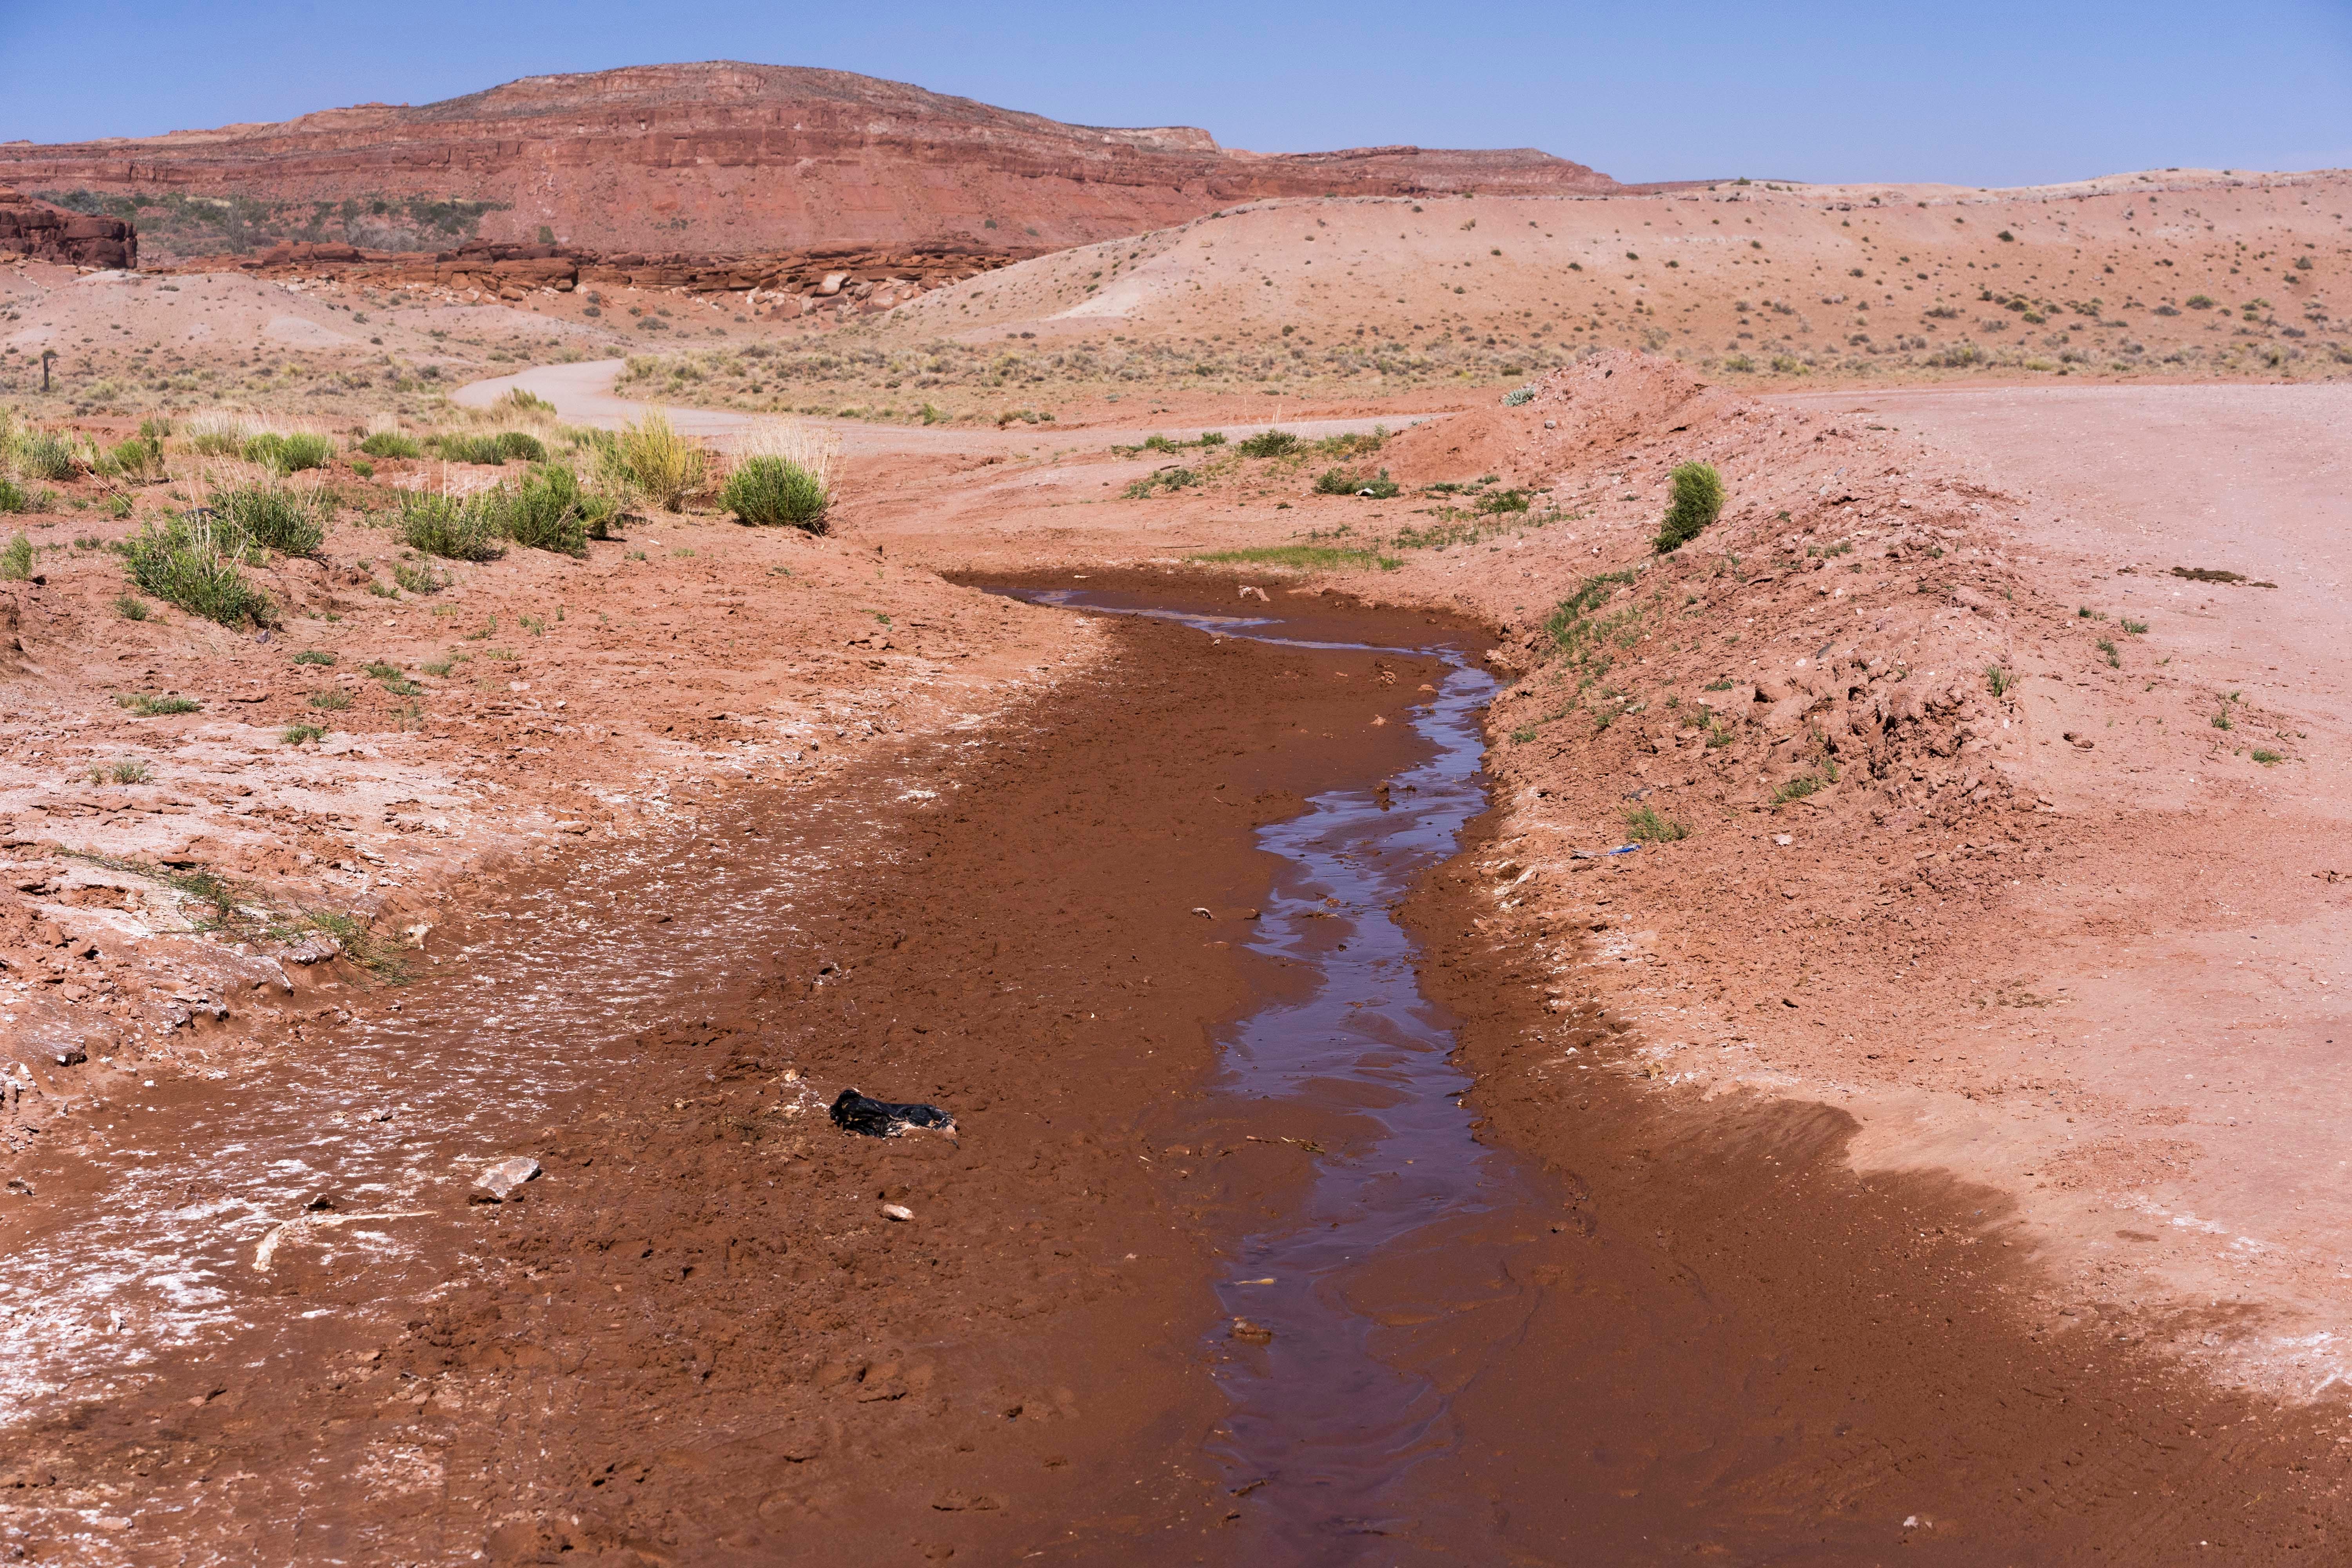 Water from a spring forms a small stream in the Monument Valley Tribal Park on the Navajo Nation.